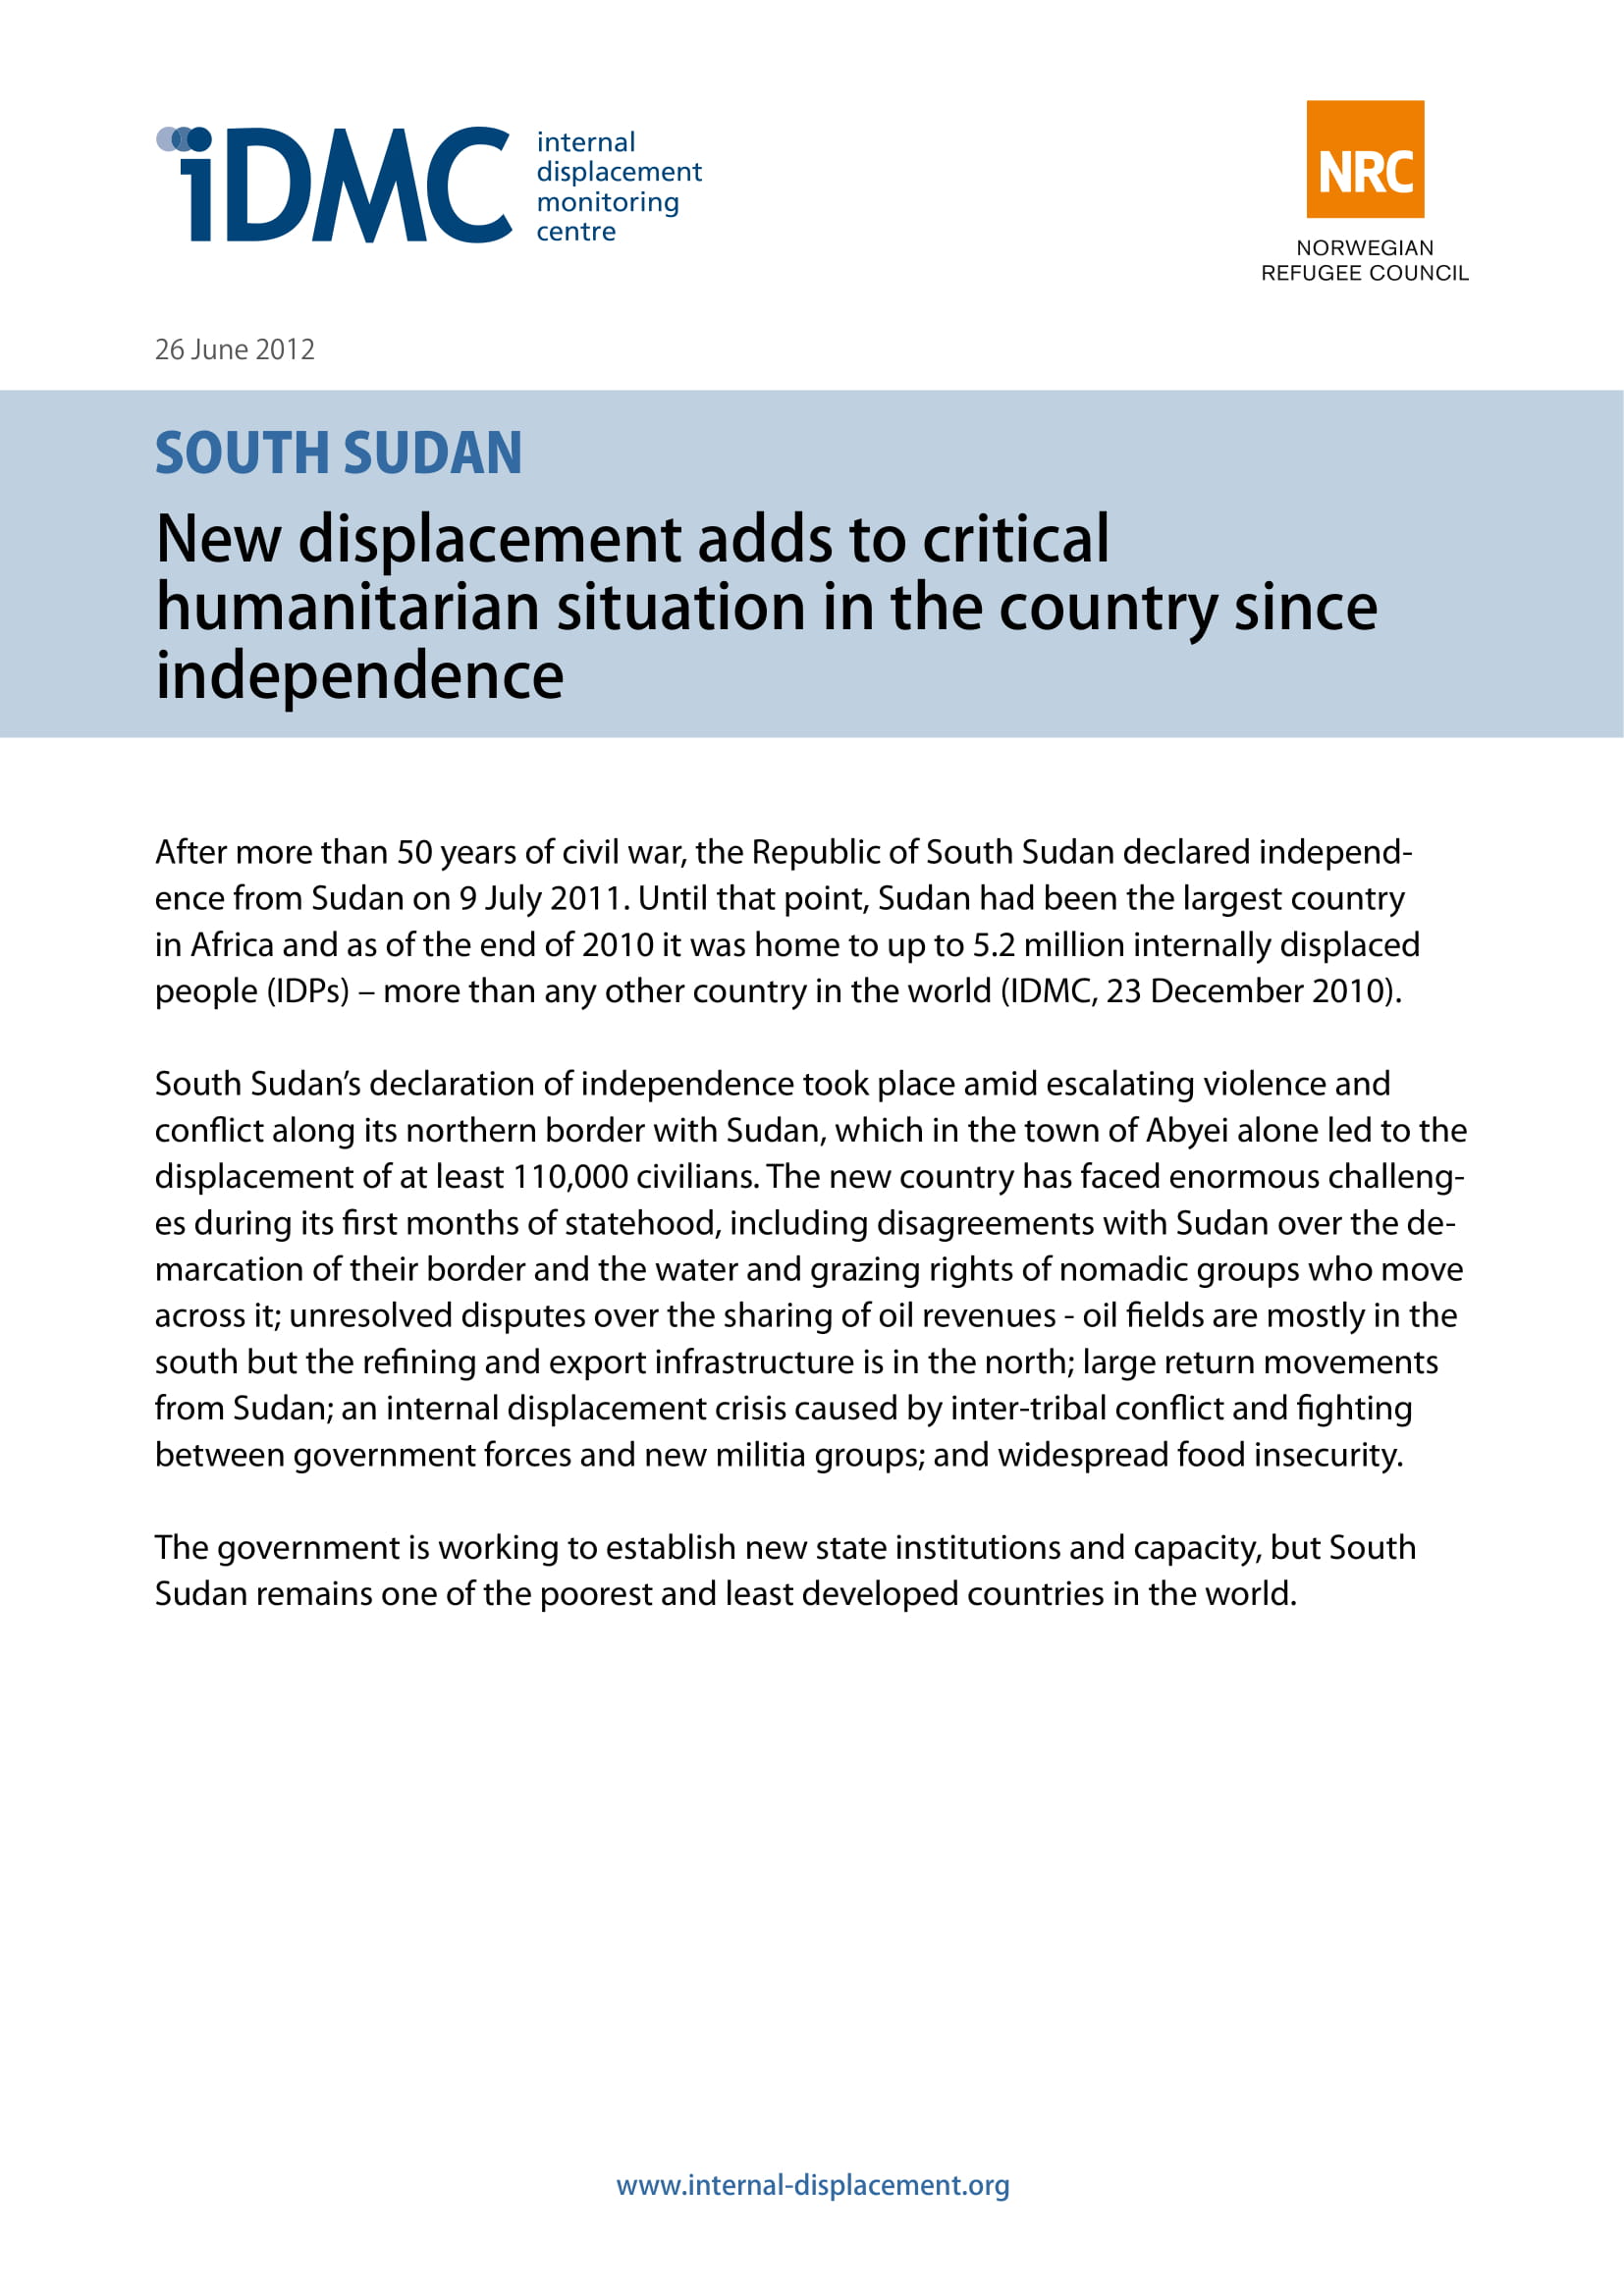 South Sudan: New displacement adds to critical humanitarian situation in the country since independence